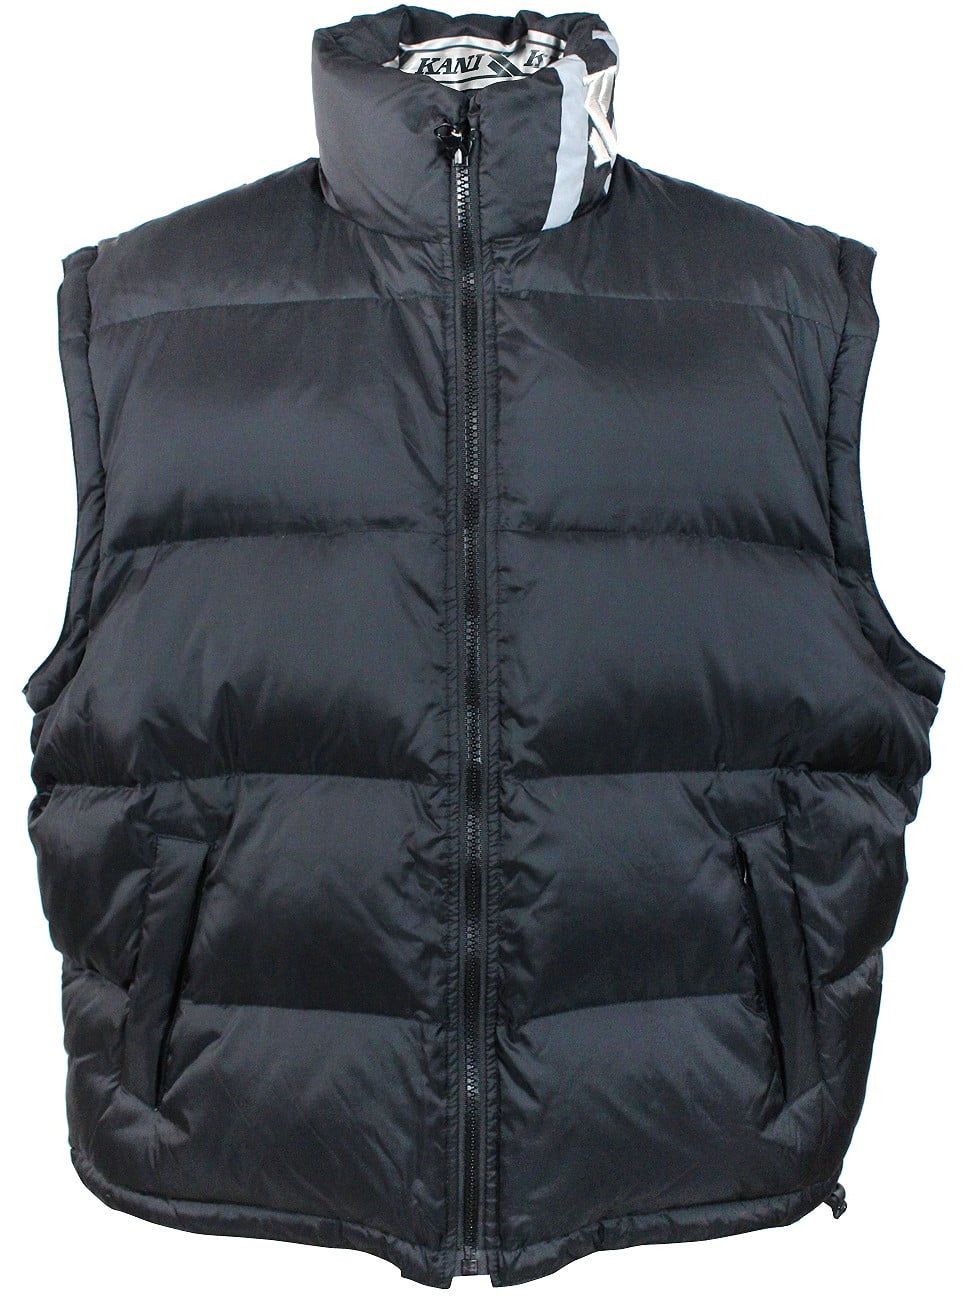 Karl Kani Insulted Puffy Reversible Men's Jacket Vest with Sleeves Black Silver Walmart.com